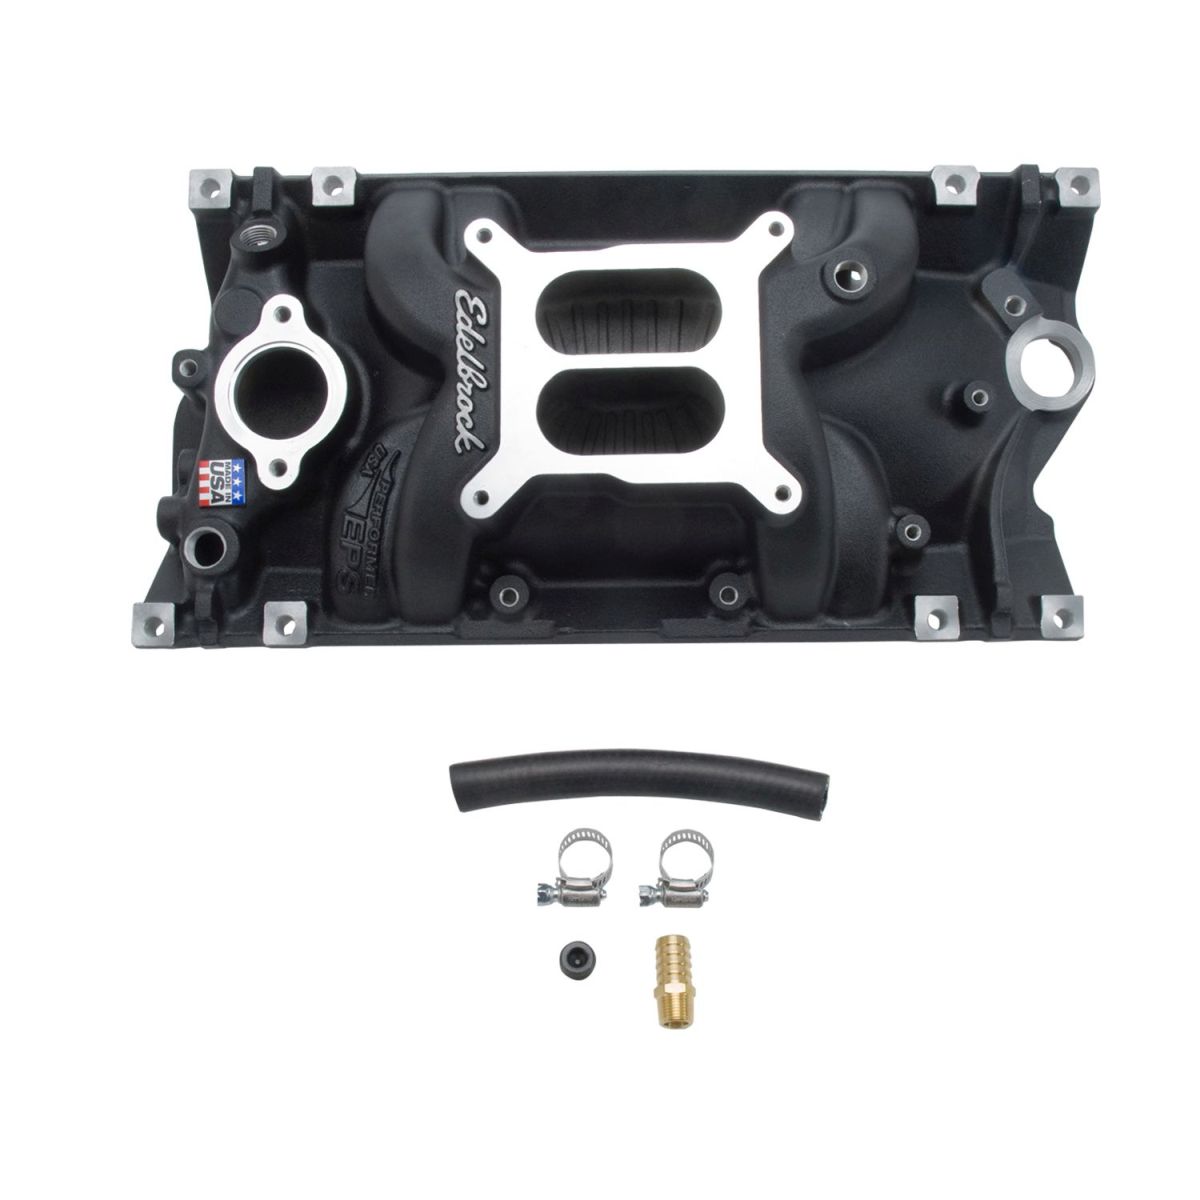 Edelbrock Performer EPS Vortec Intake Manifold for Small-Block Chevy ...